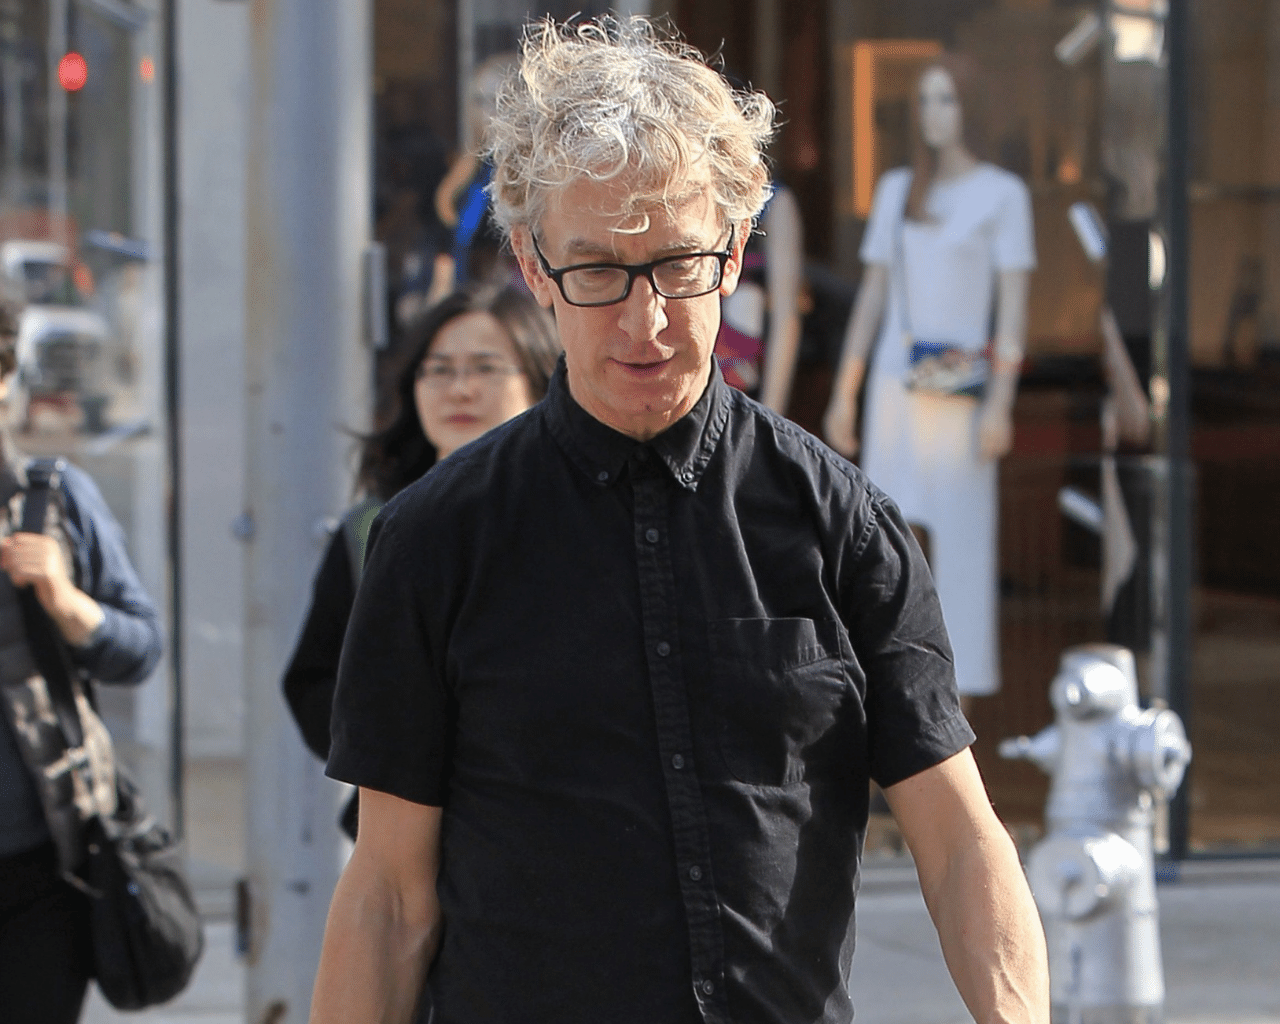 Andy Dick Sentenced To 3 Months In Jail, Ordered To Register As A Sex Offender pic